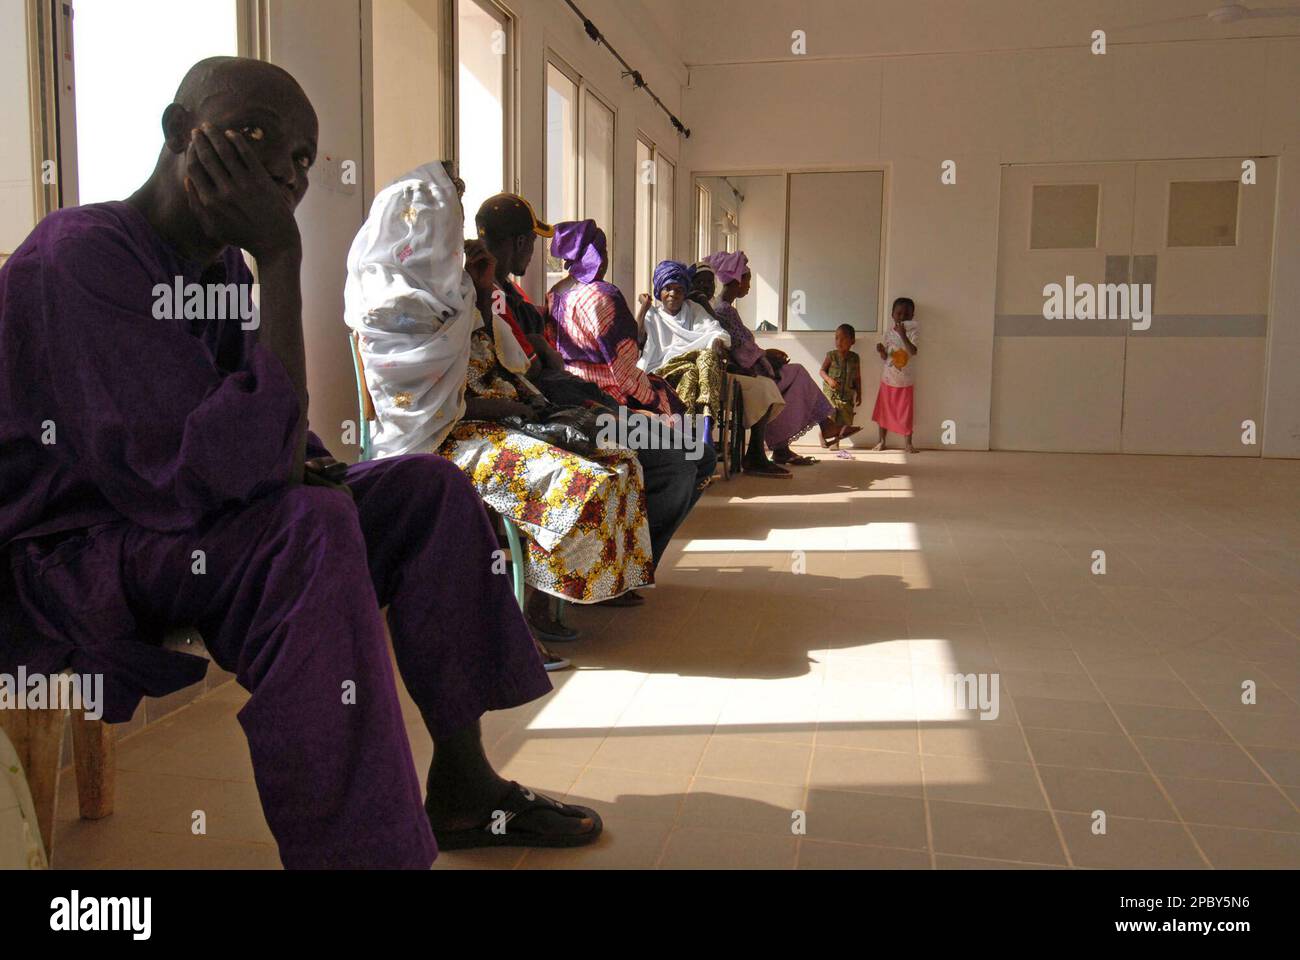 Patients await for an alleged herbal HIV treatment by Gambia's President  Yahya Jammeh, at Serrekunda Hospital in Banjul, Gambia, Friday, Feb. 16,  2007. Surrounded by bodyguards, the president of Gambia pulls on